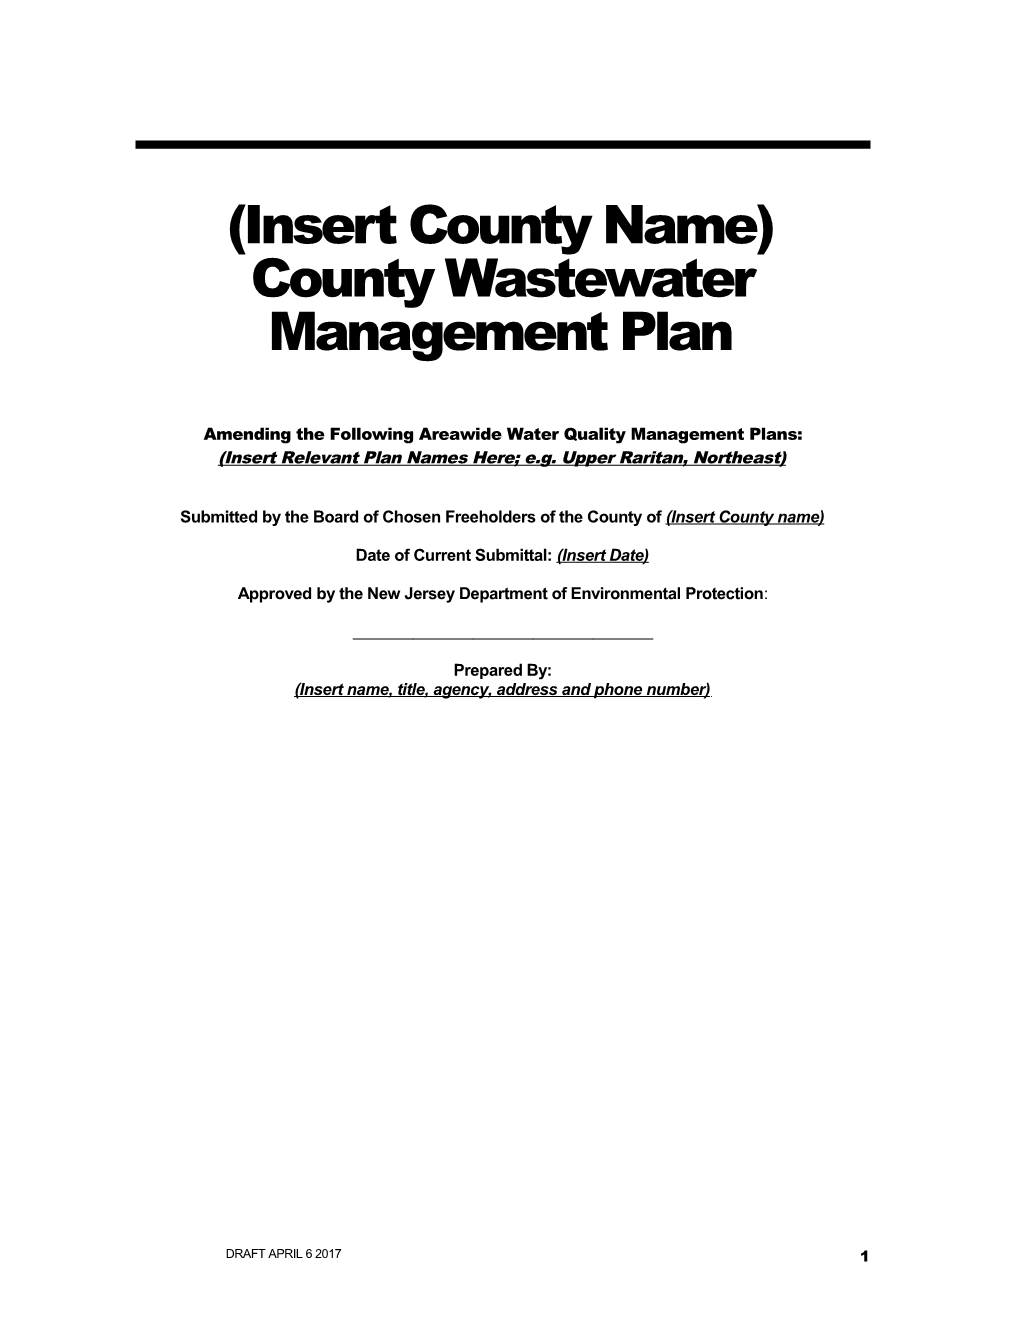 (Insert County Name) County Wastewater Management Plan